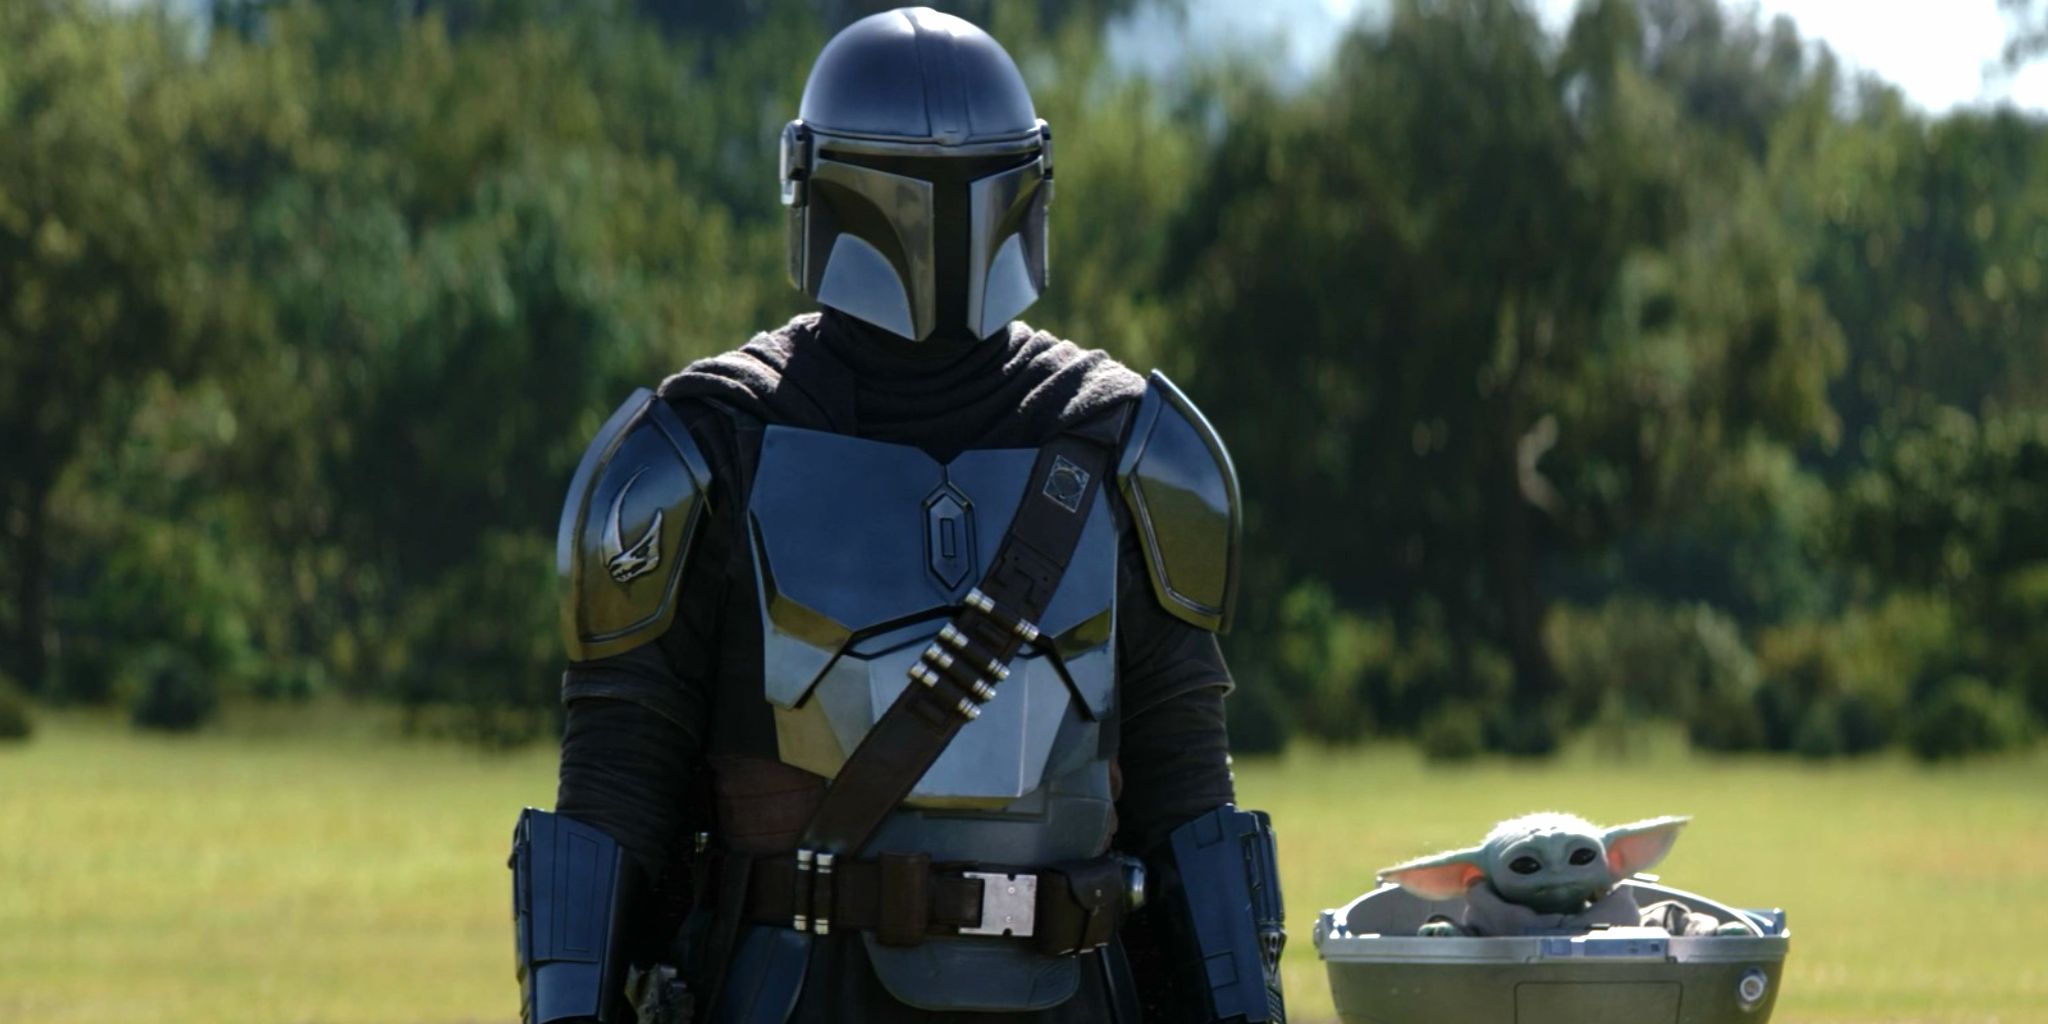 This Mandalorian Cosplay Is So Good, It Looks Like It's Straight Out Of The Show